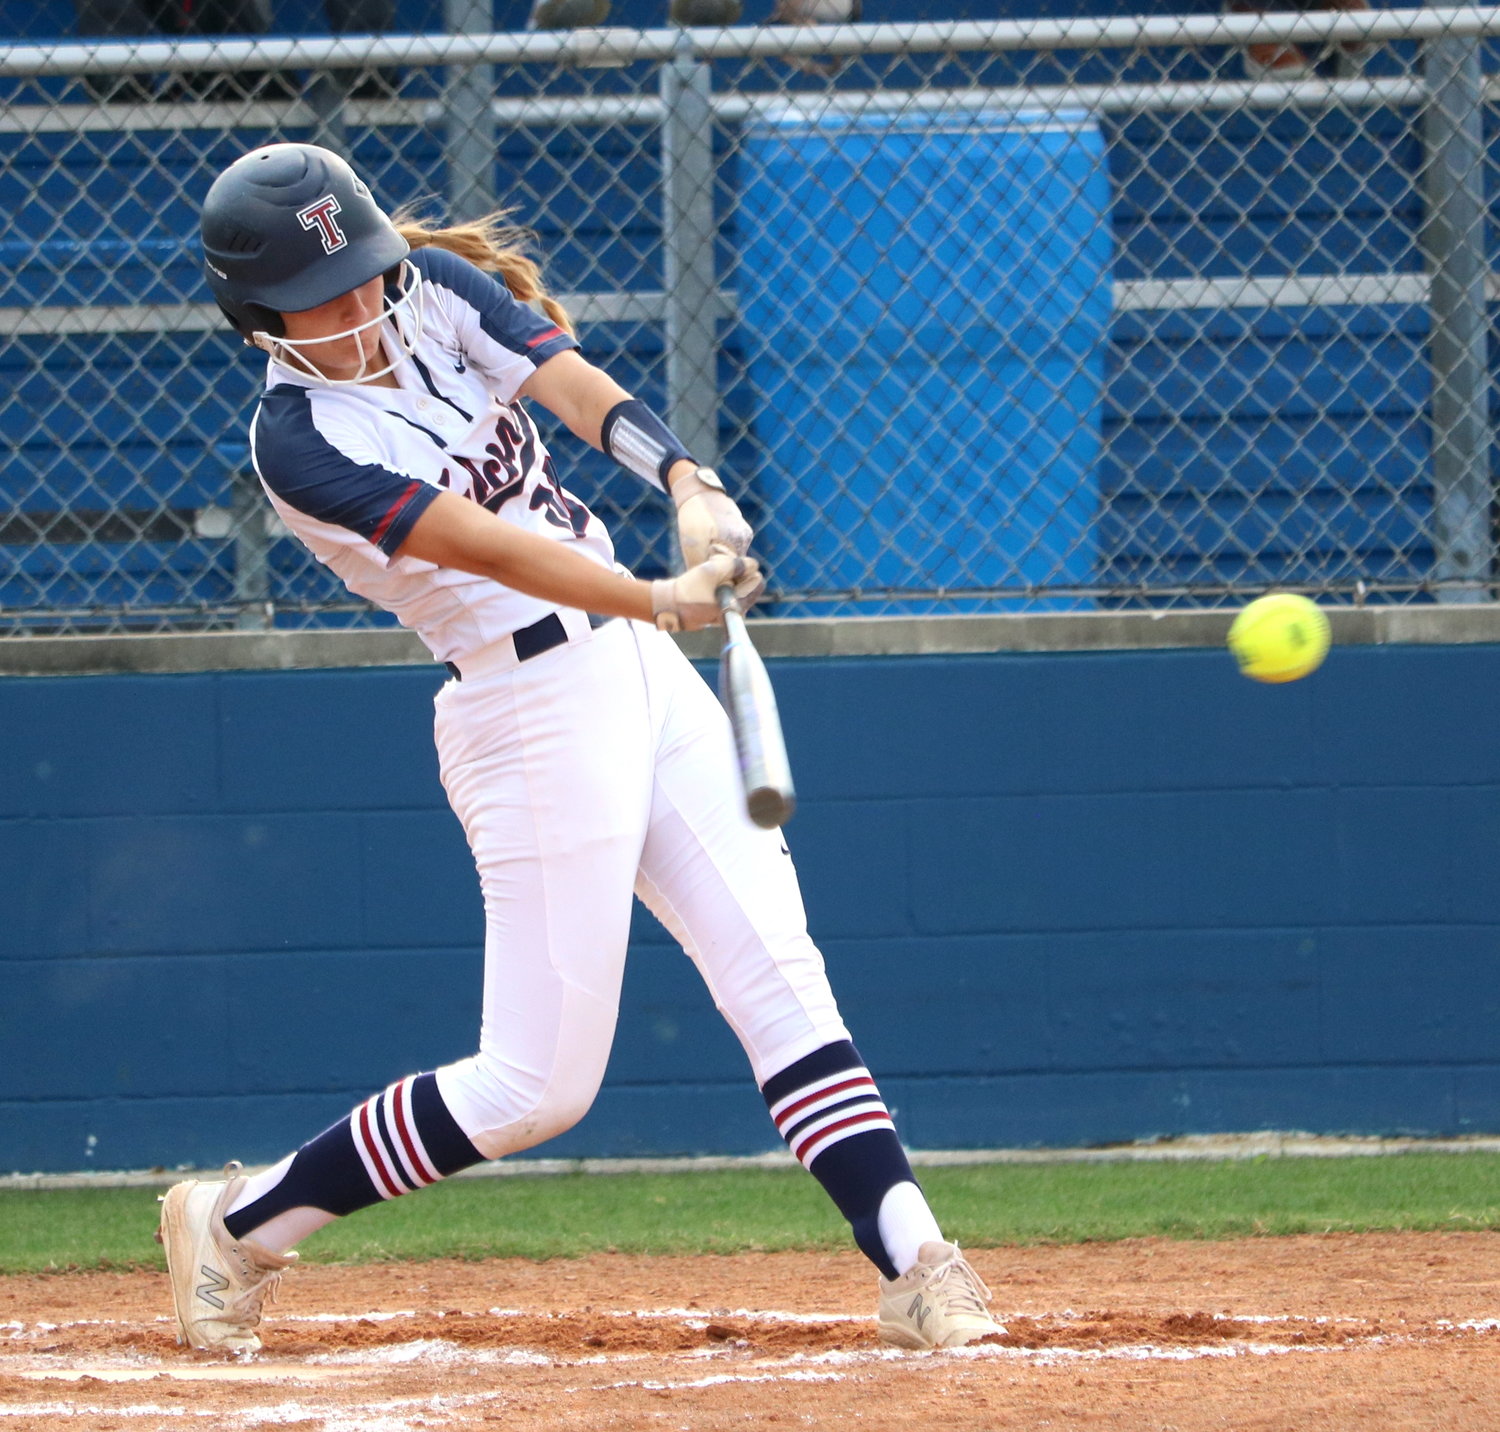 A Tompkins player hits during Thursday’s bi-district game between Tompkins and George Ranch at the Tompkins softball field.